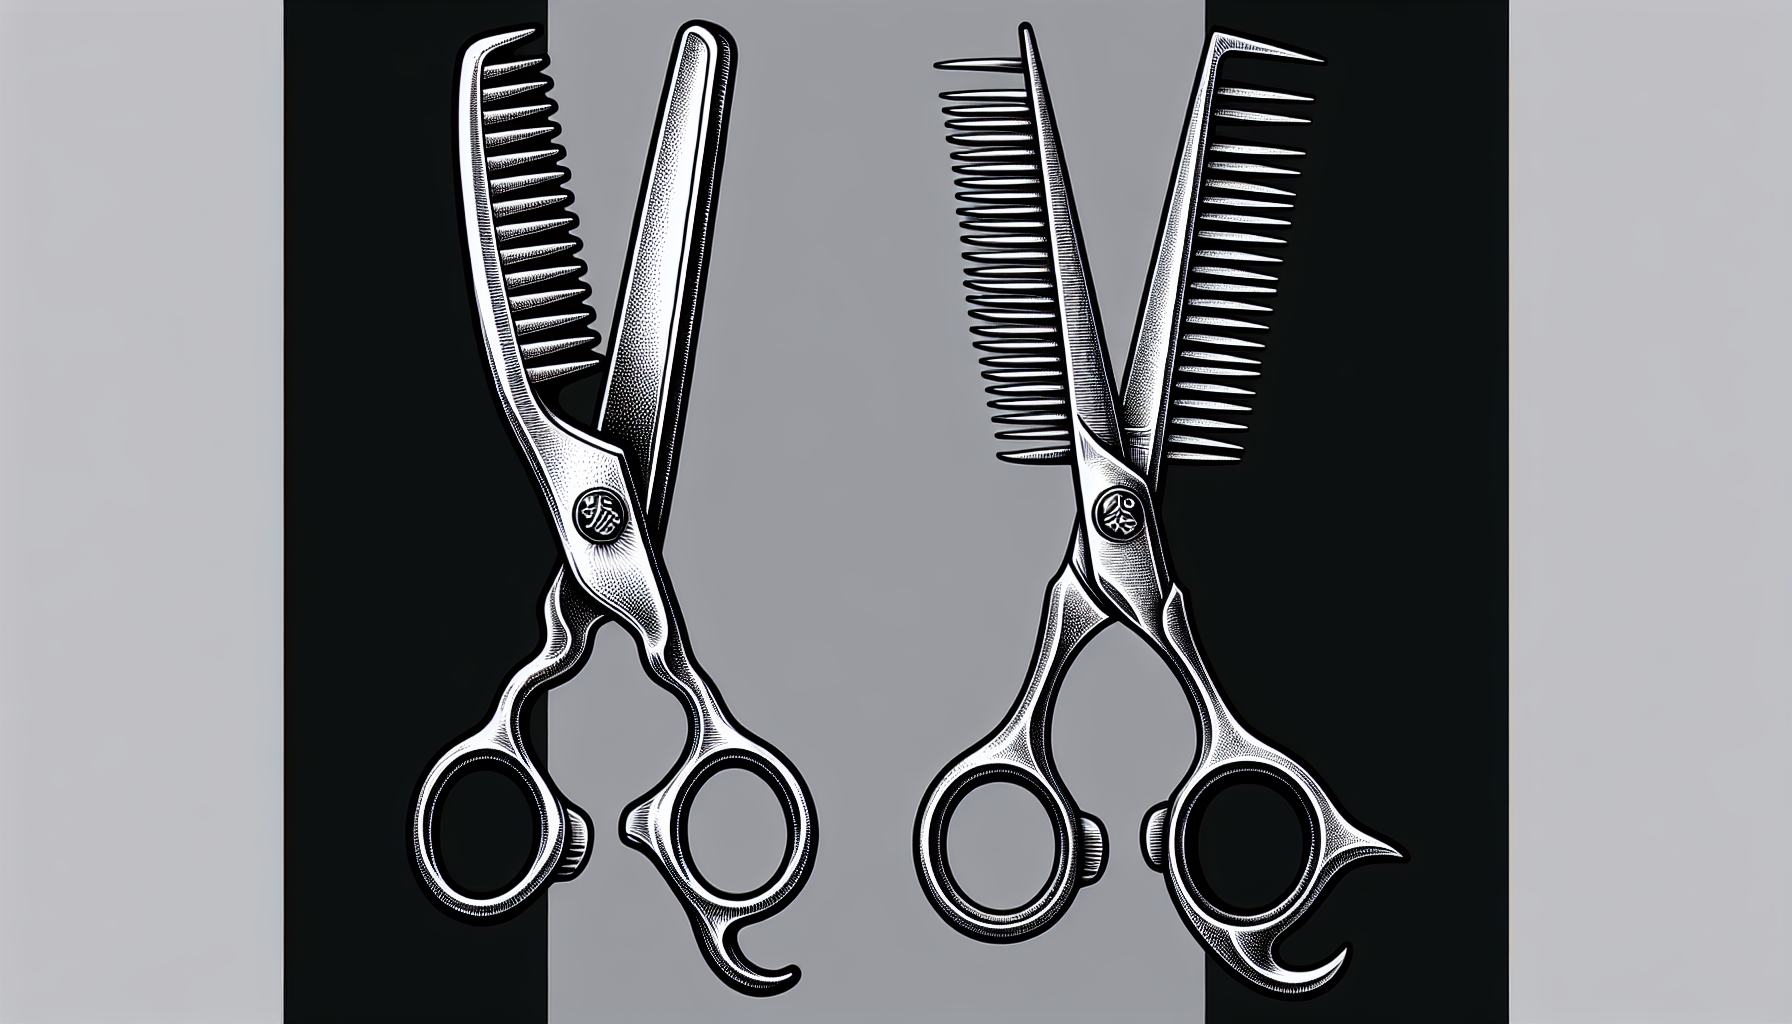 Comparison of blade sharpness between dog and human scissors